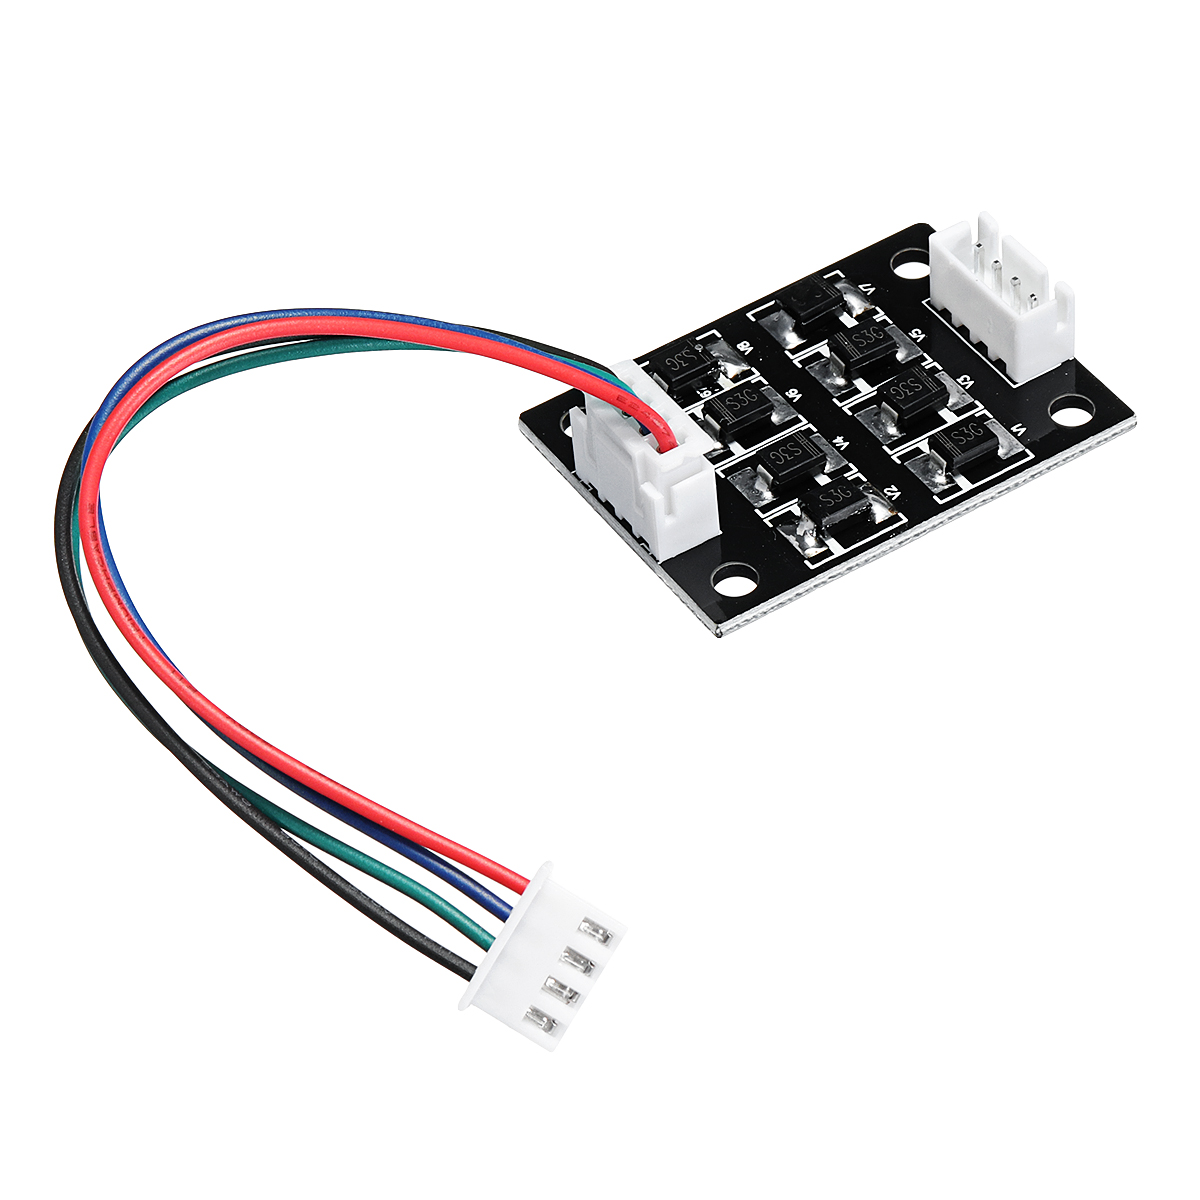 3PCS TL-Smoother Addon Module With Dupont Line For 3D Printer Stepper Motor 13